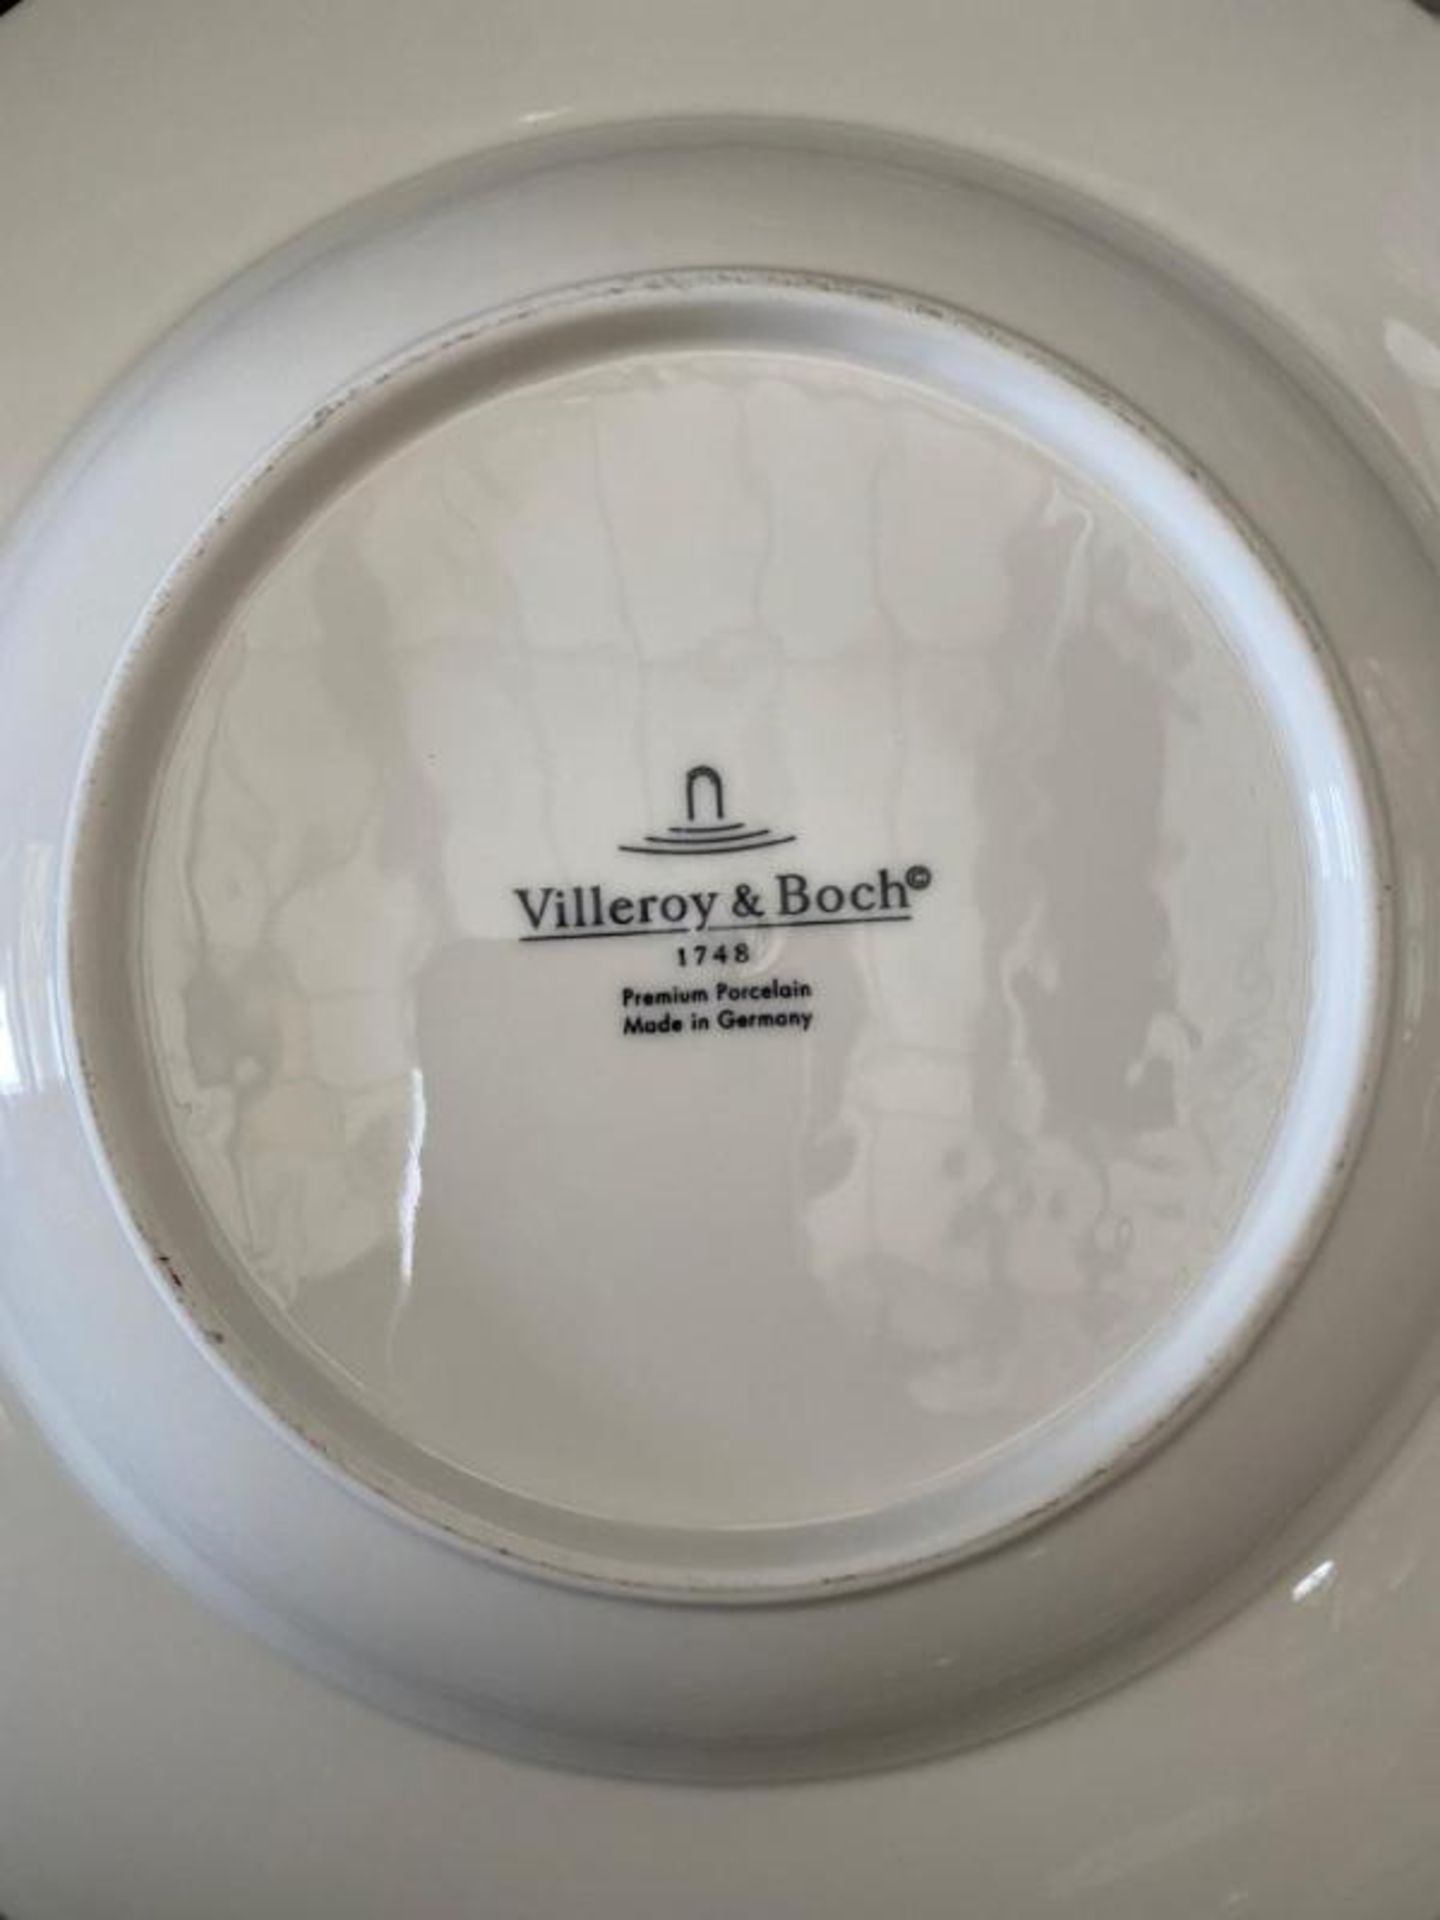 6 x Villeroy & Boch Royal Dinner Plate -290mm (29cm) - Ref: 1044122620 - New and boxed - CL011 - MC5 - Image 5 of 5